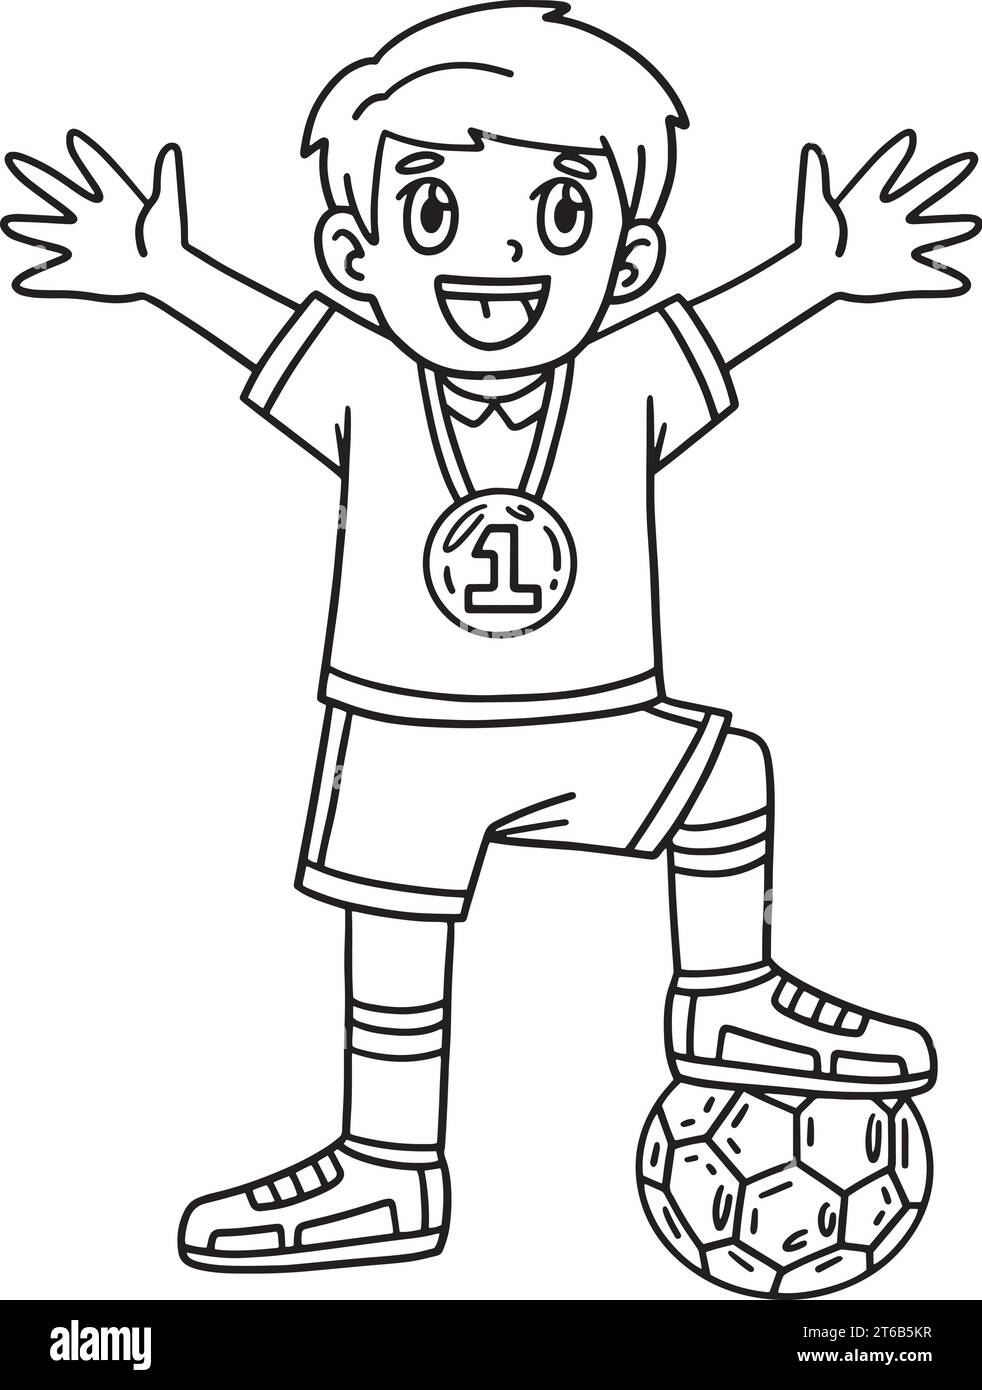 Soccer Boy Wearing Medal Isolated Coloriage page Illustration de Vecteur